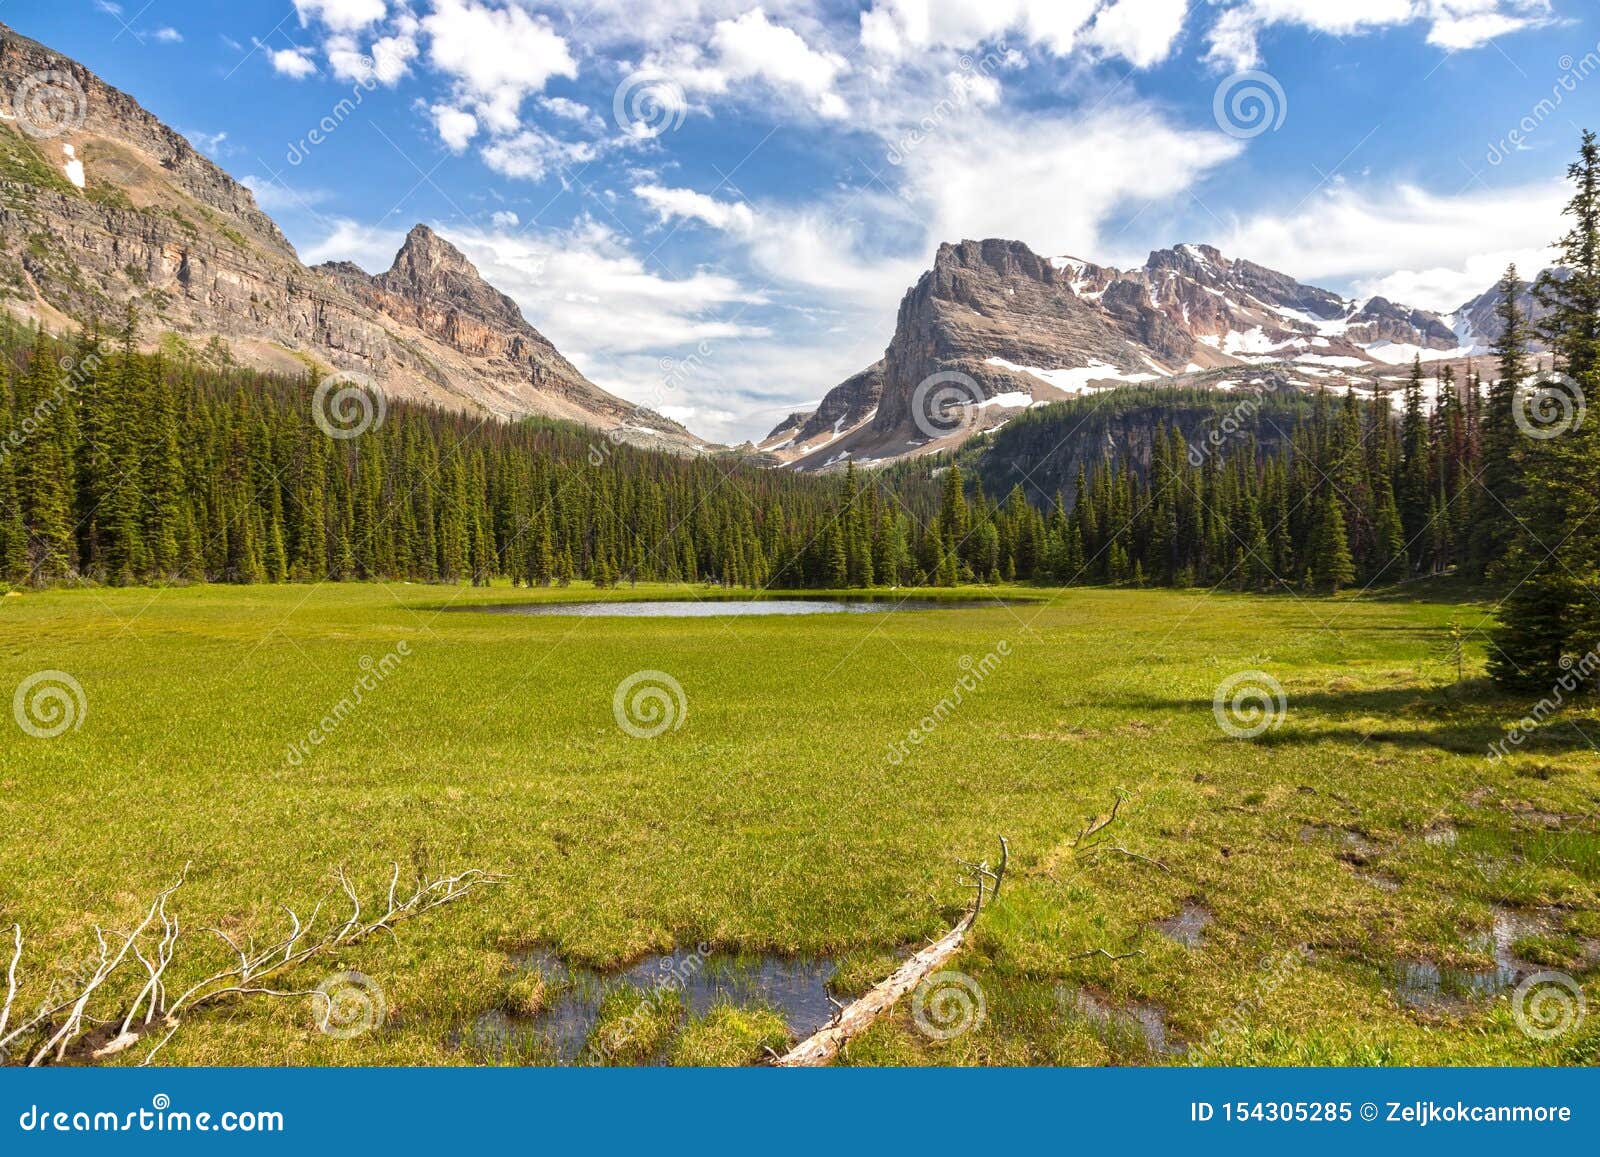 Green Alpine Meadow Distant Snowcapped Mountain Peaks Banff National